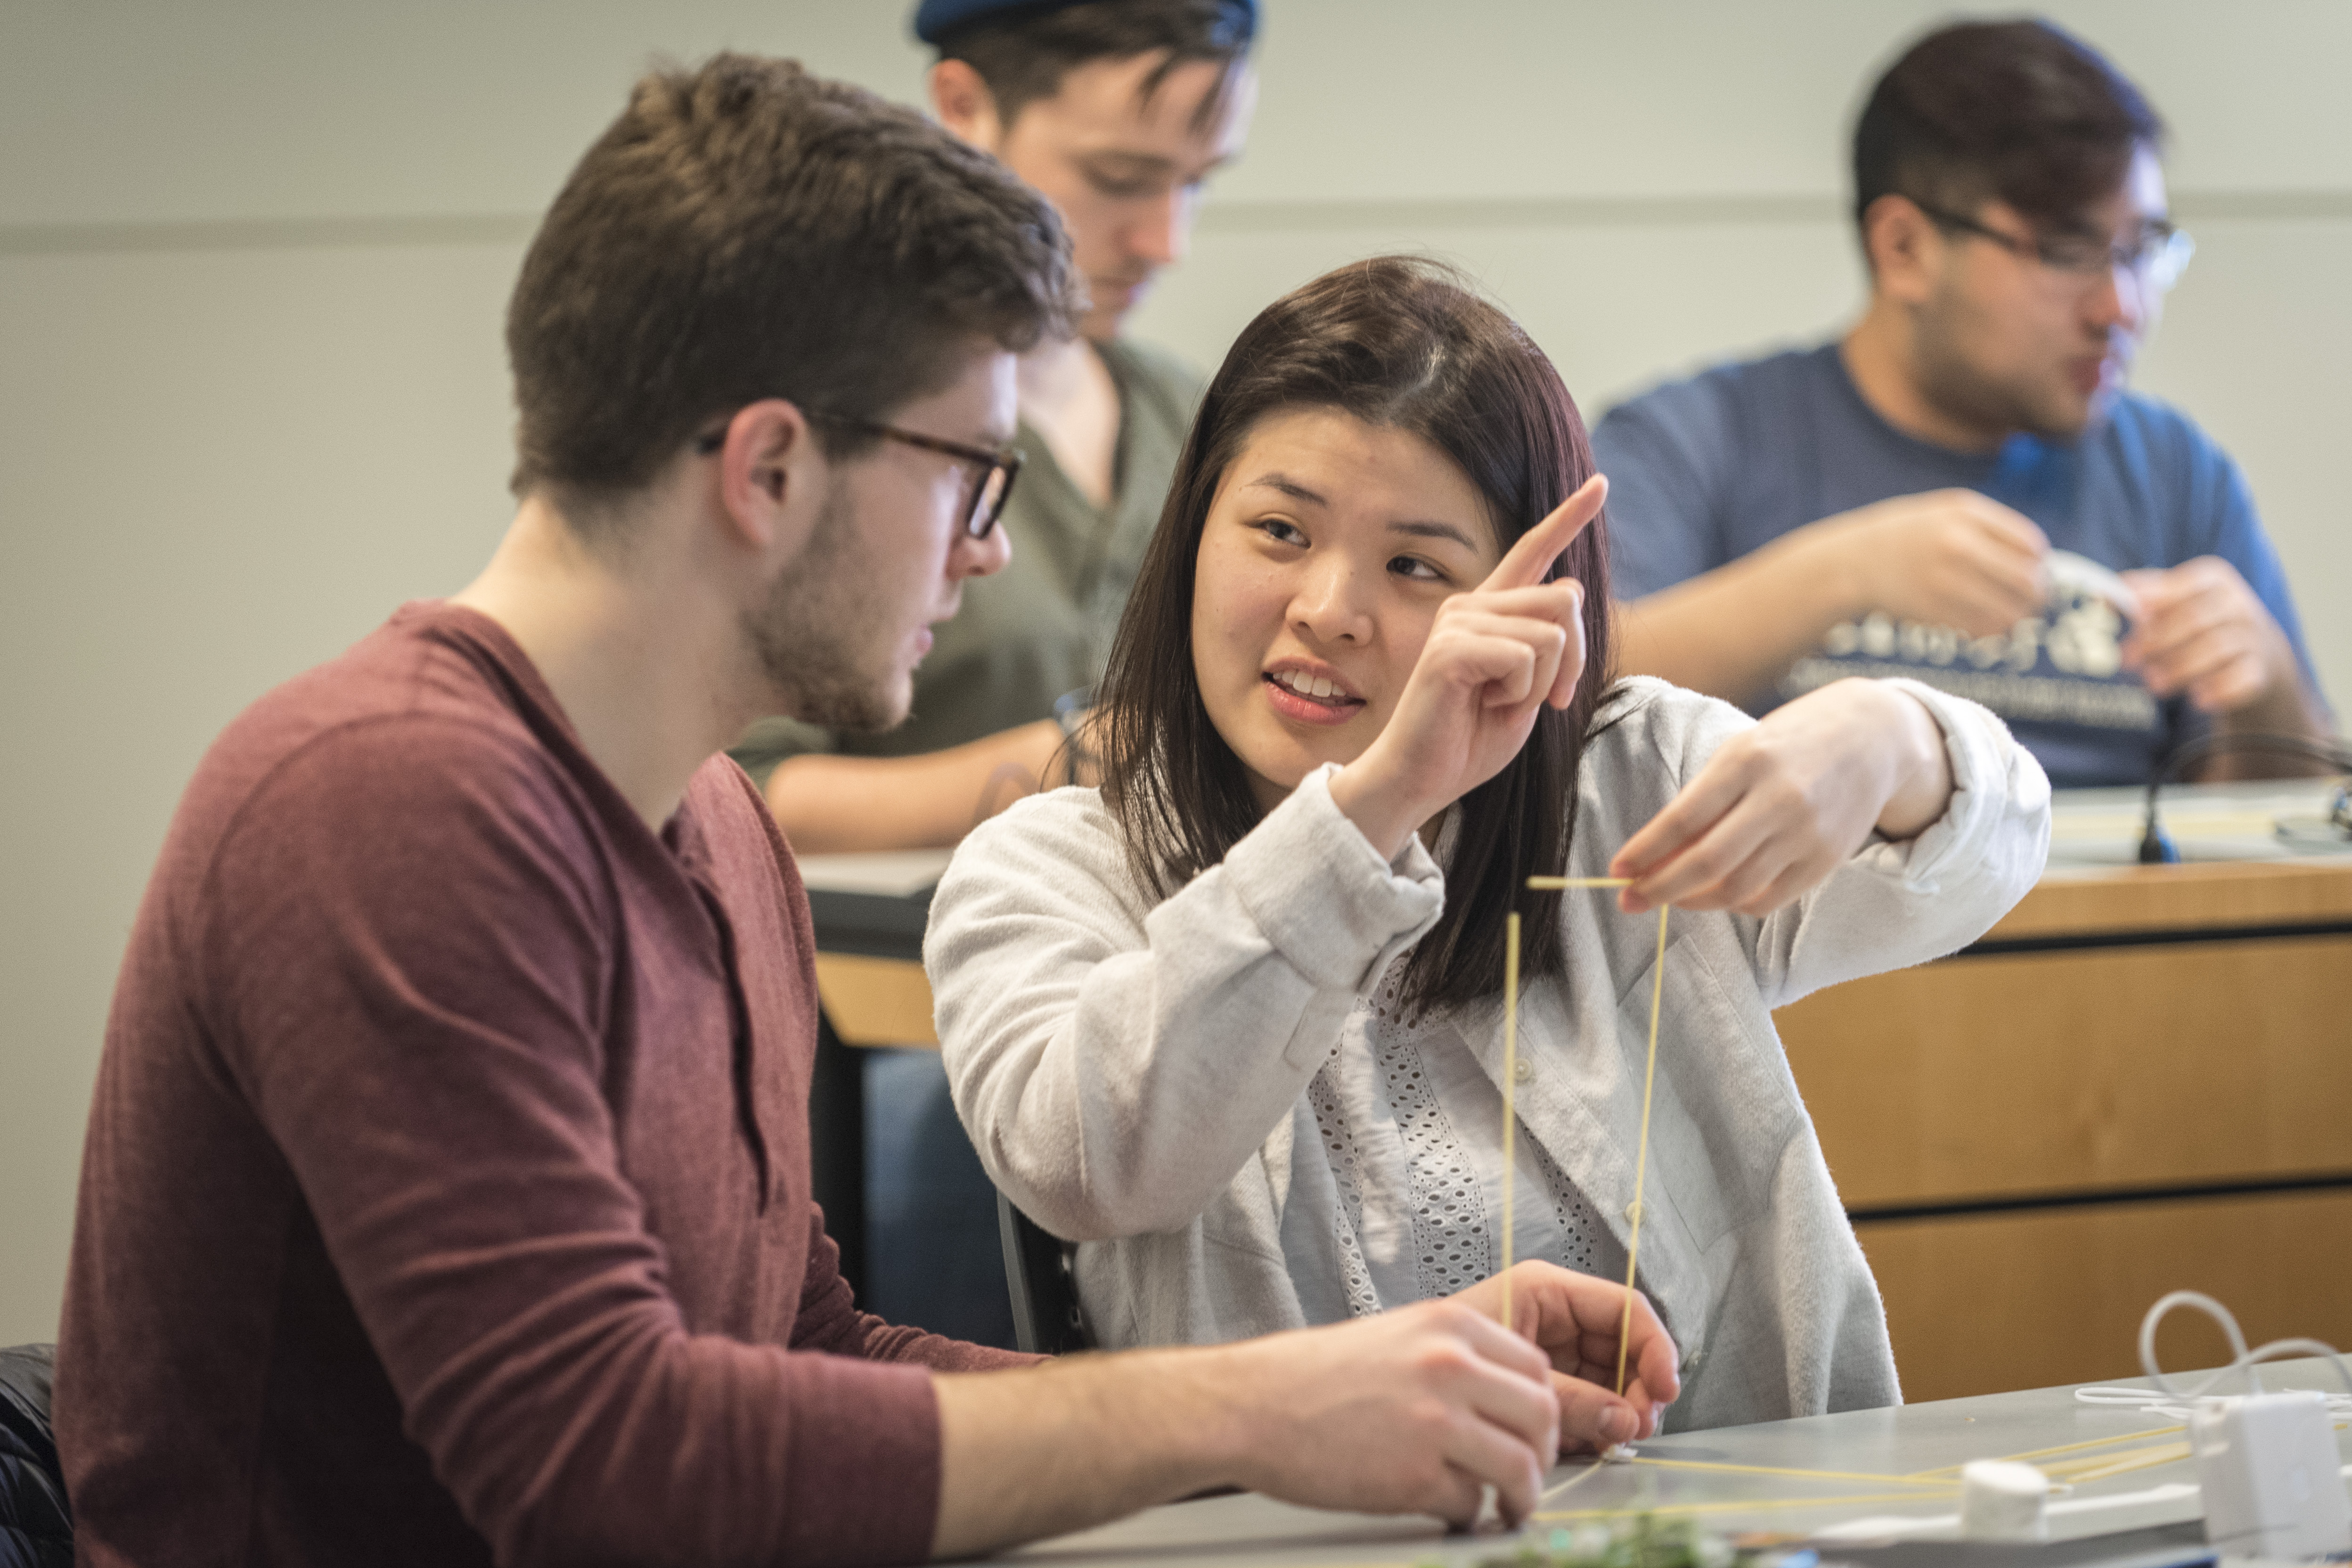 Undergraduates Richard Vincent III, left, and Cindy Lin discuss a hands-on exercise called 'Design Thinking: Marshmallow Challenge' during a class on incorporating game design into business planning. (Sean Flynn/UConn Photo)